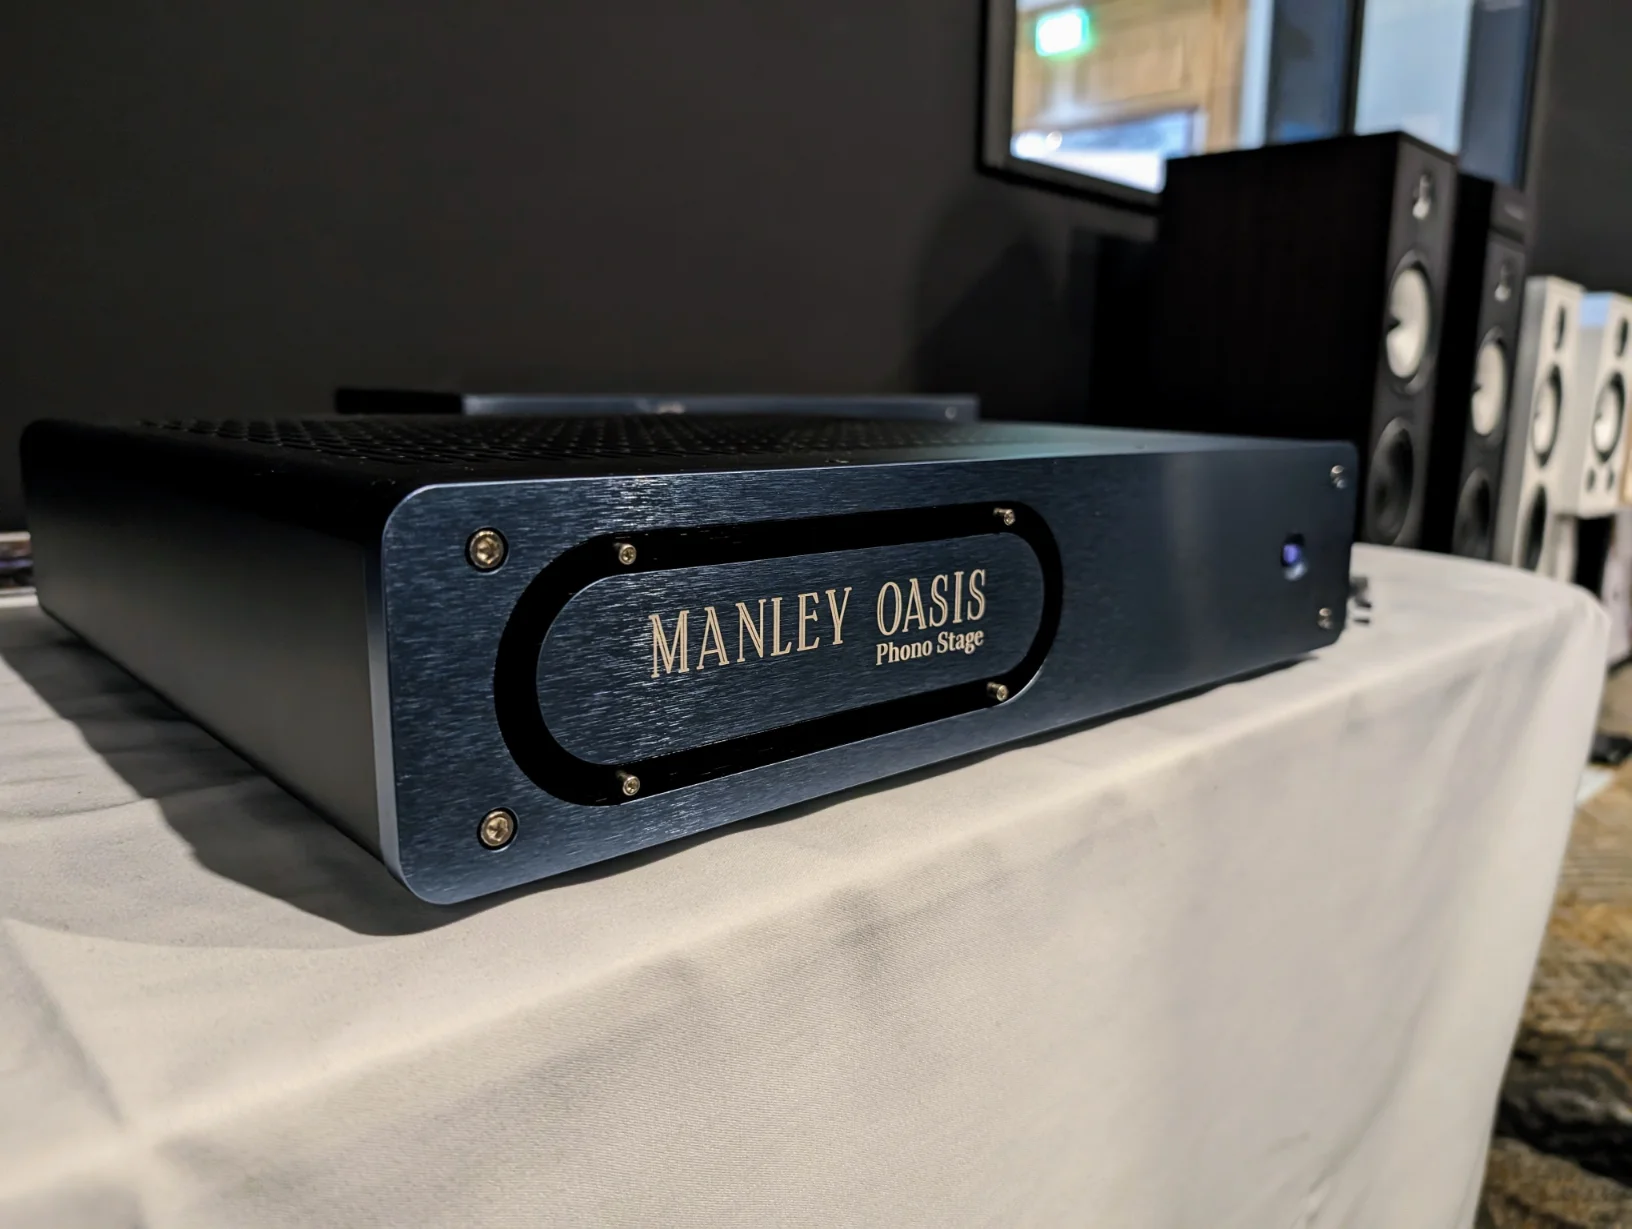 The new Manley Oasis phono stage, if the Chinook is anything to go by this tube preamp should be very impressive indeed. Will be certain to be on demonstration in store once launched!